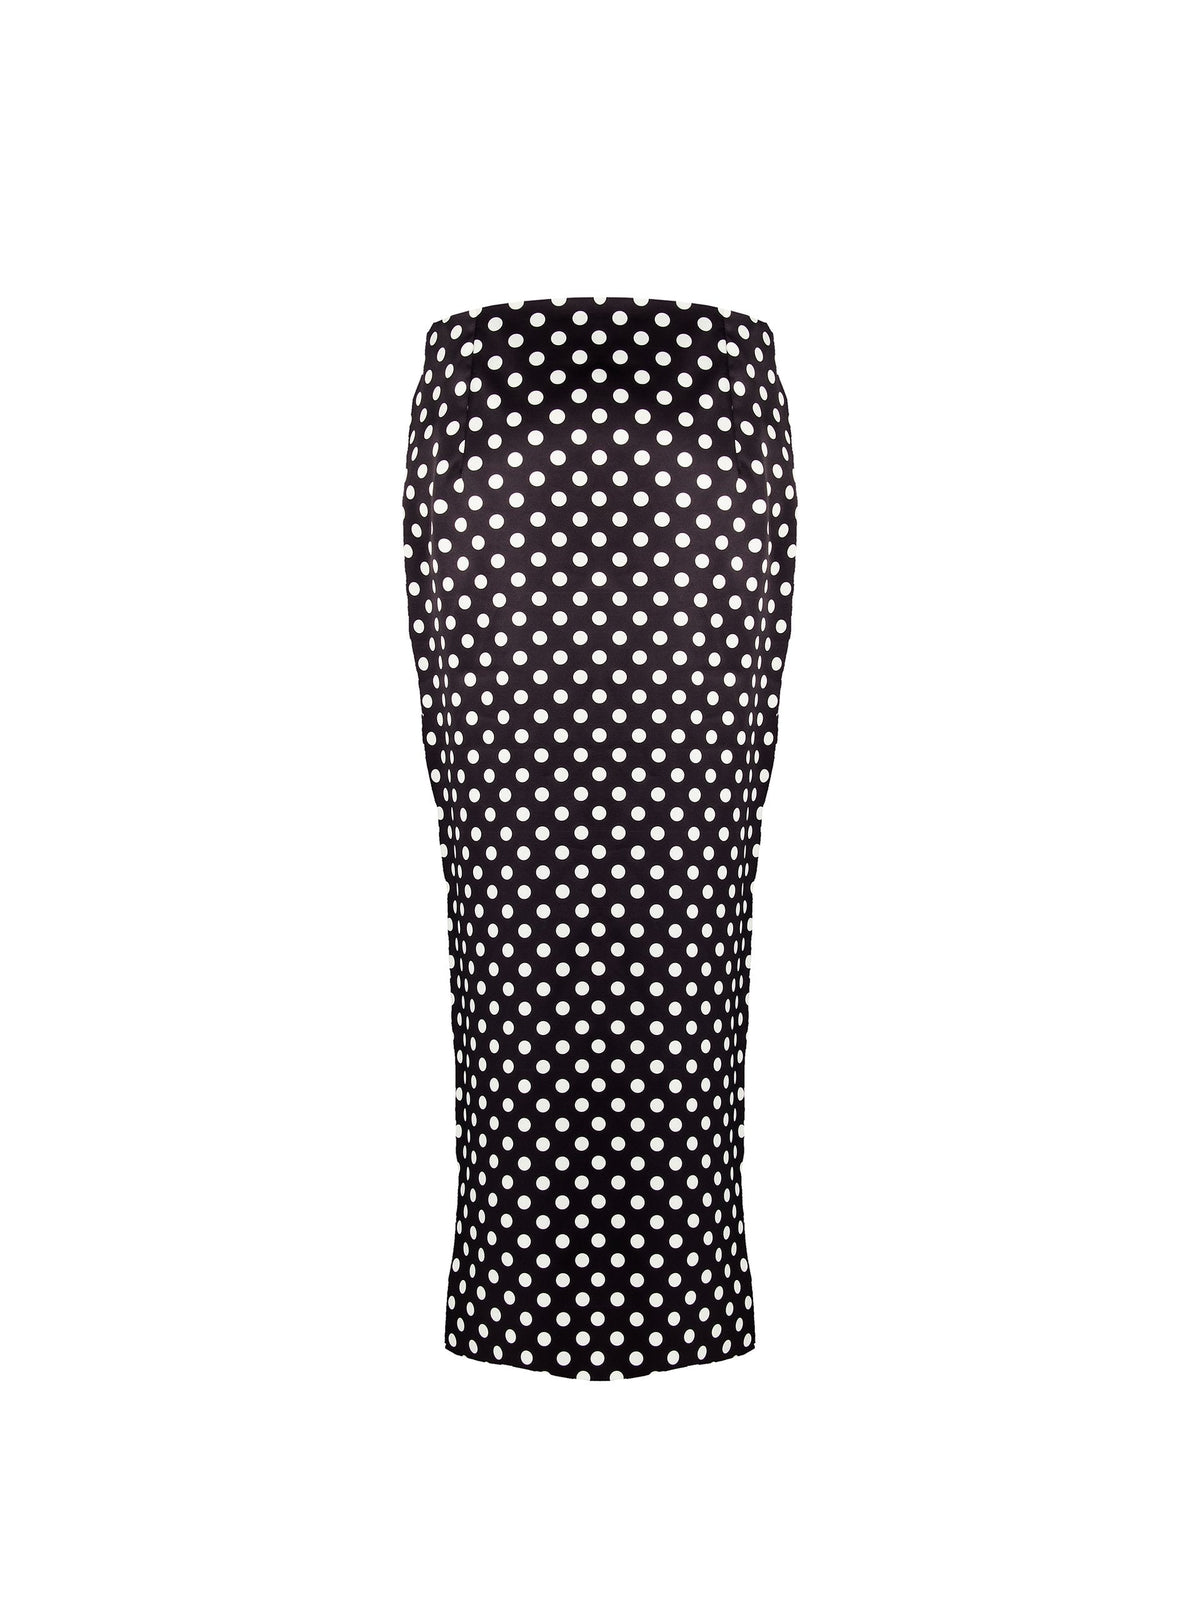 Crossover Pencil Skirt in Satin with Maxi Ruffle